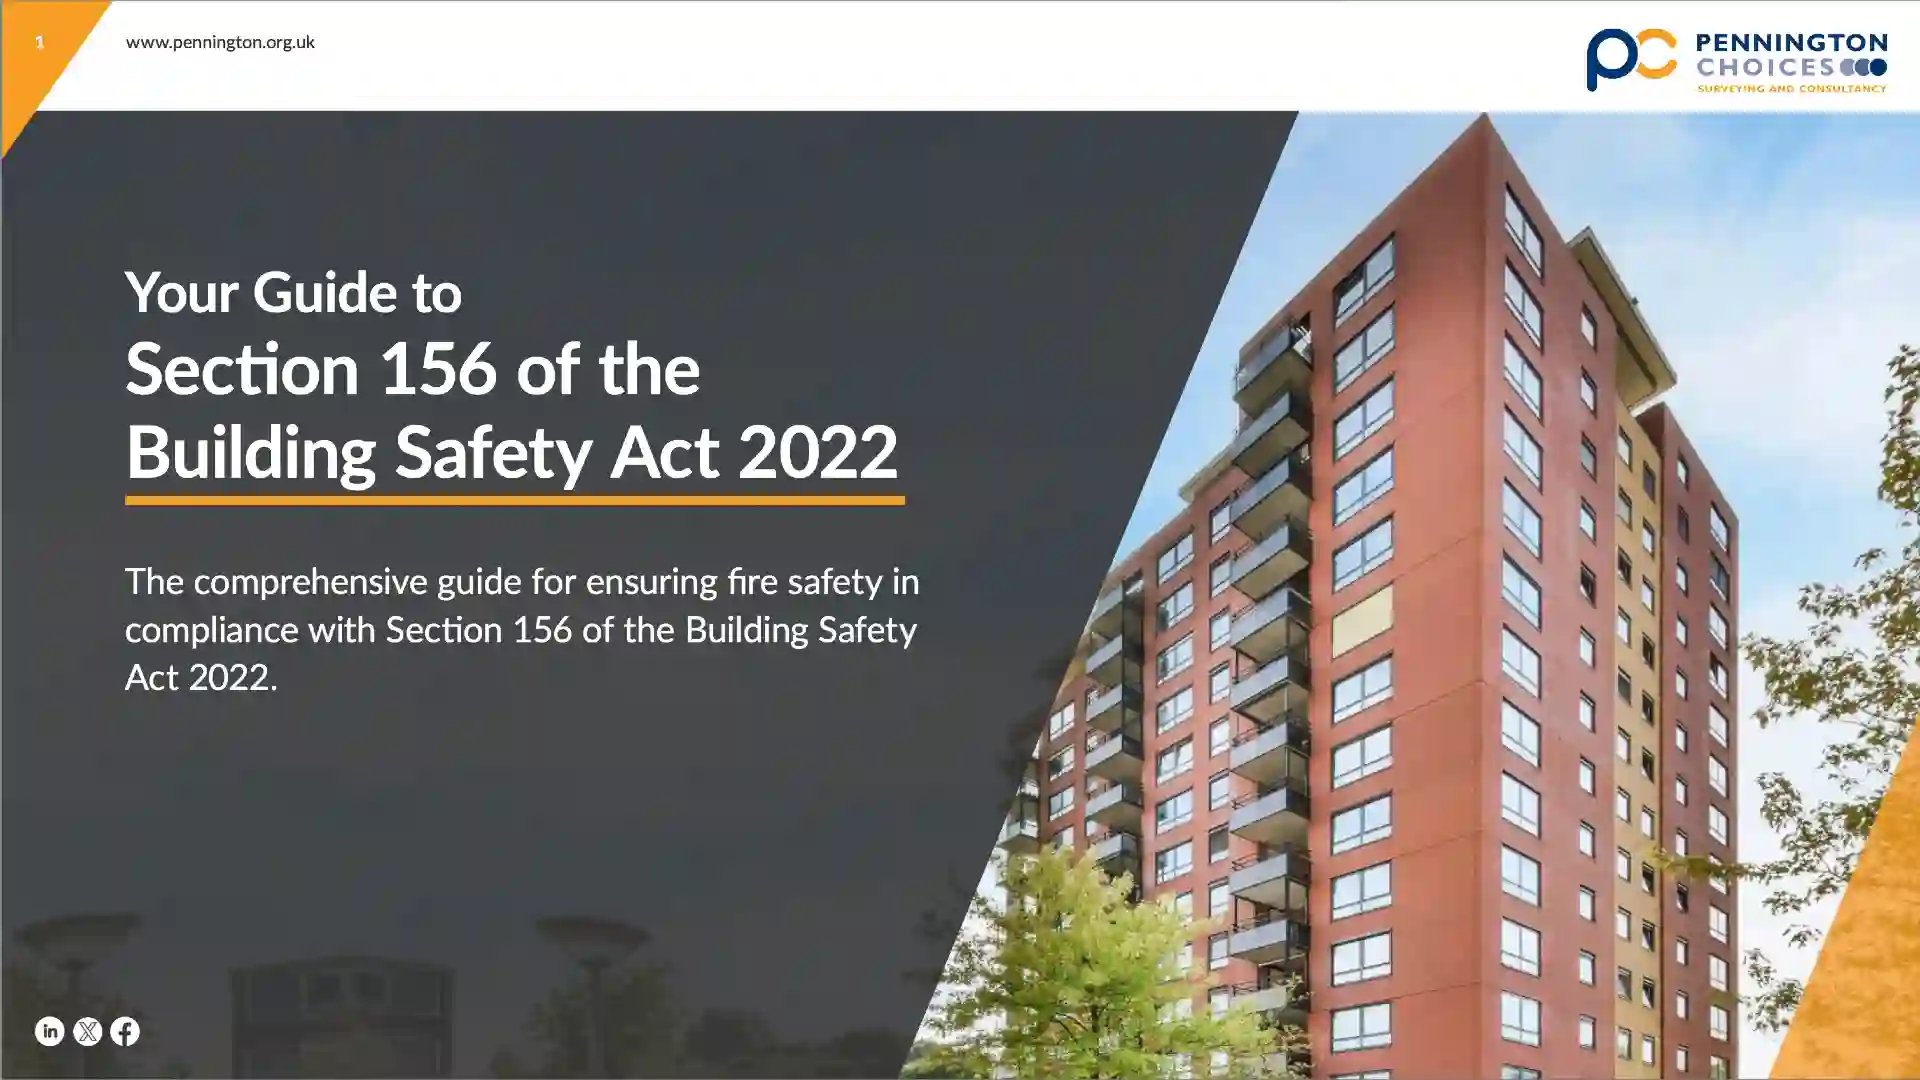 Your guide to Section 156 of the Building Safety Act 2022 - Pennington Choices